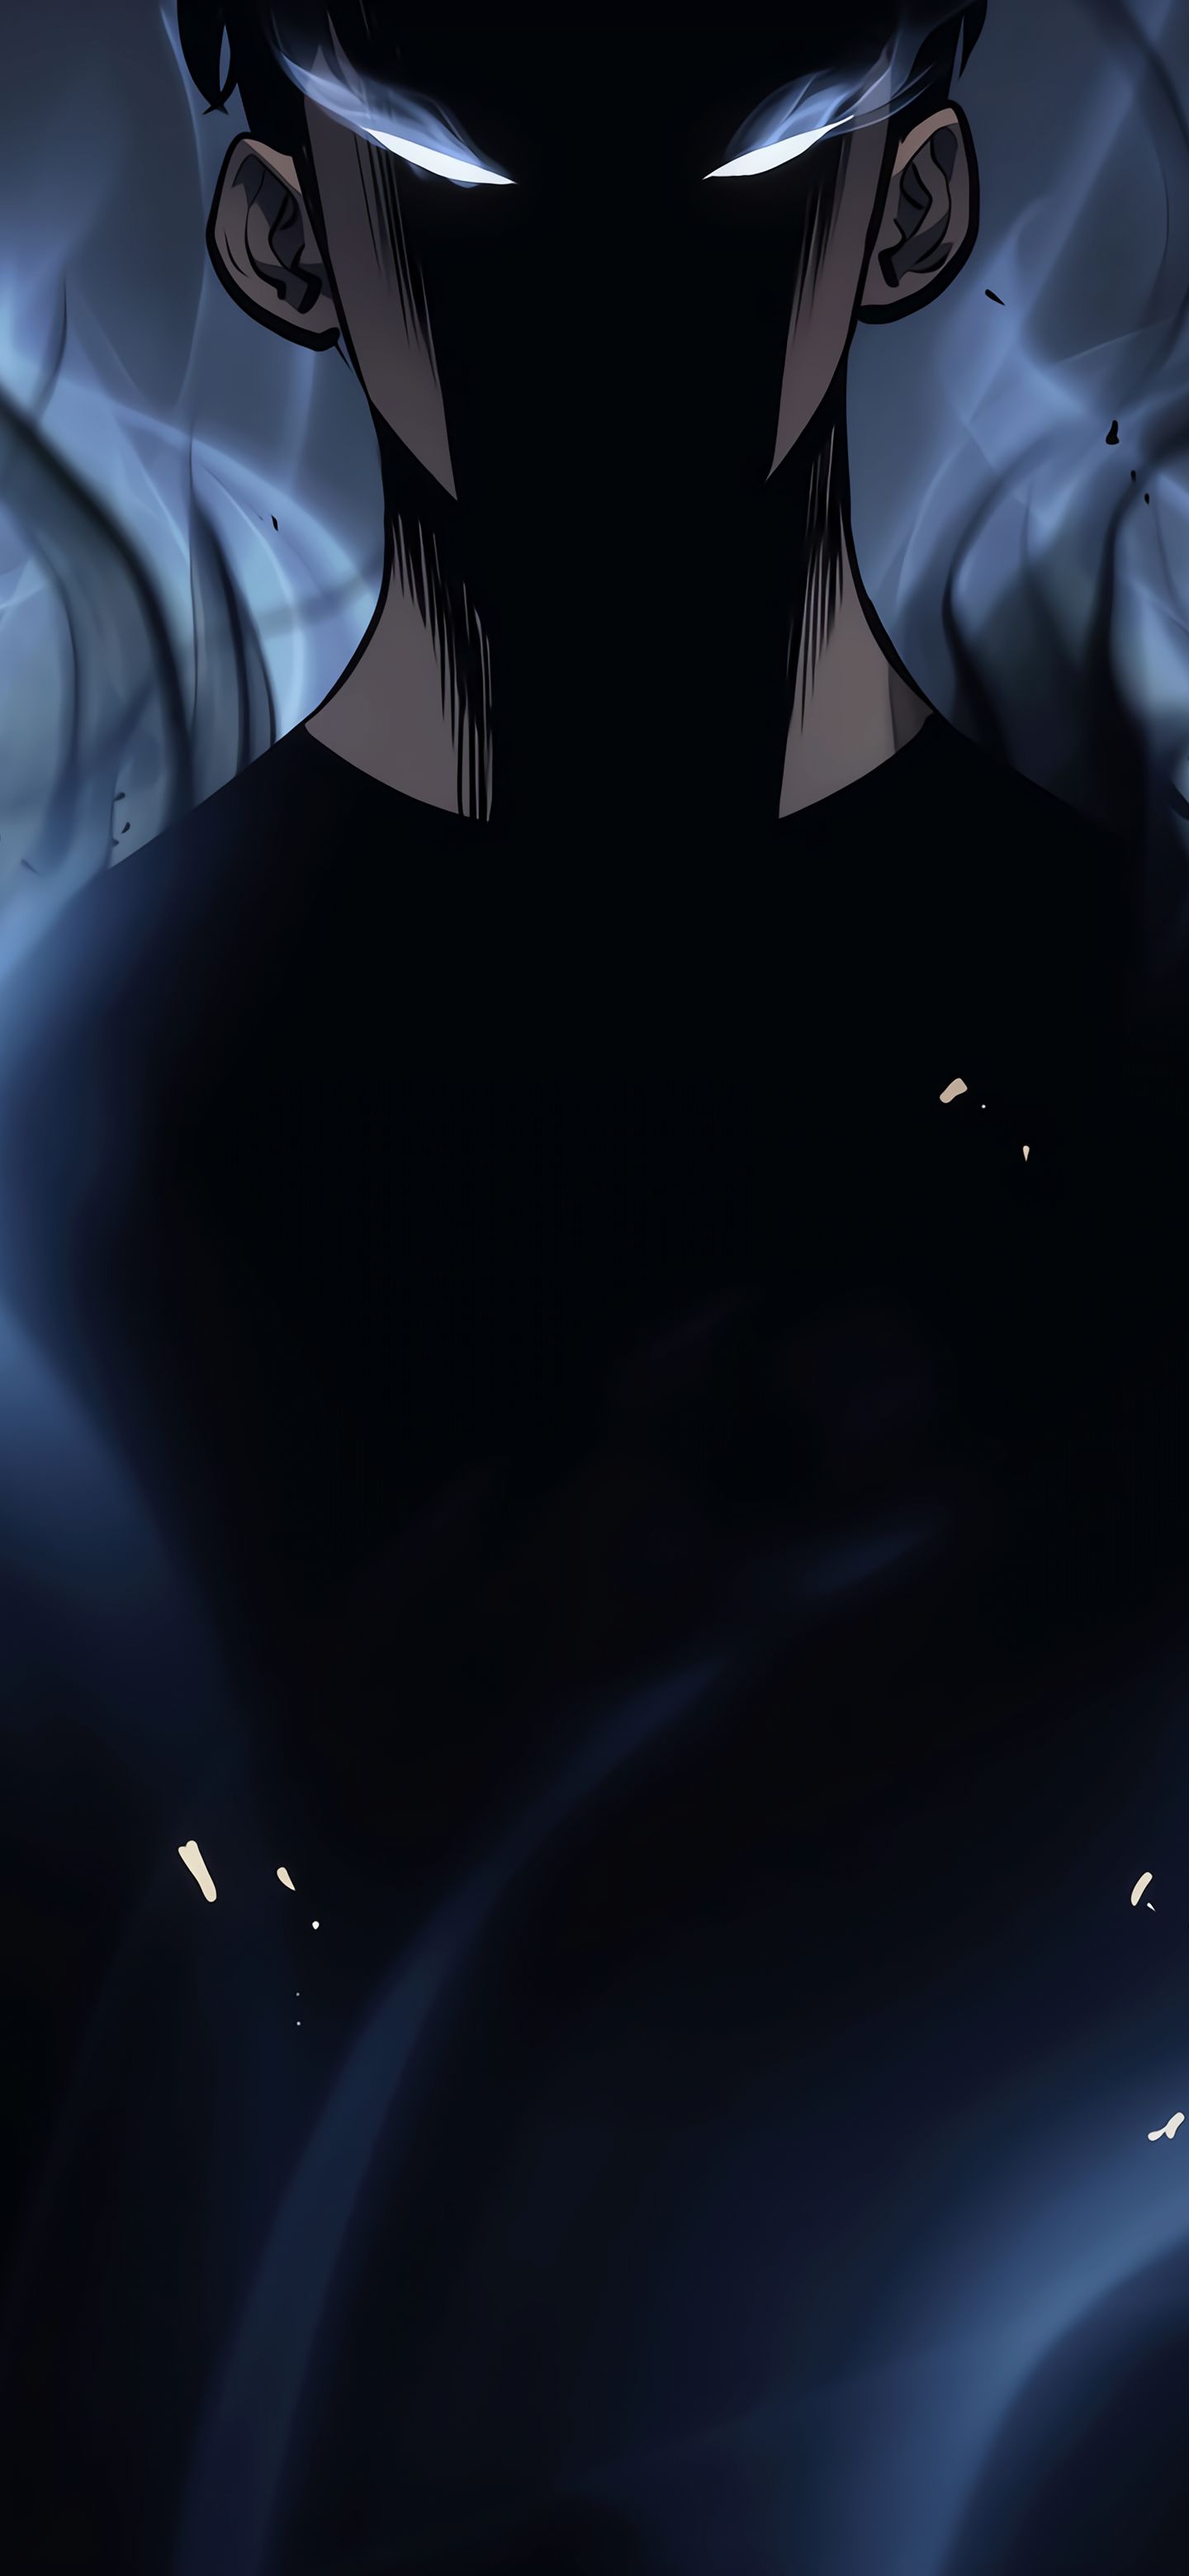 sung jin woo, solo leveling, anime phone background